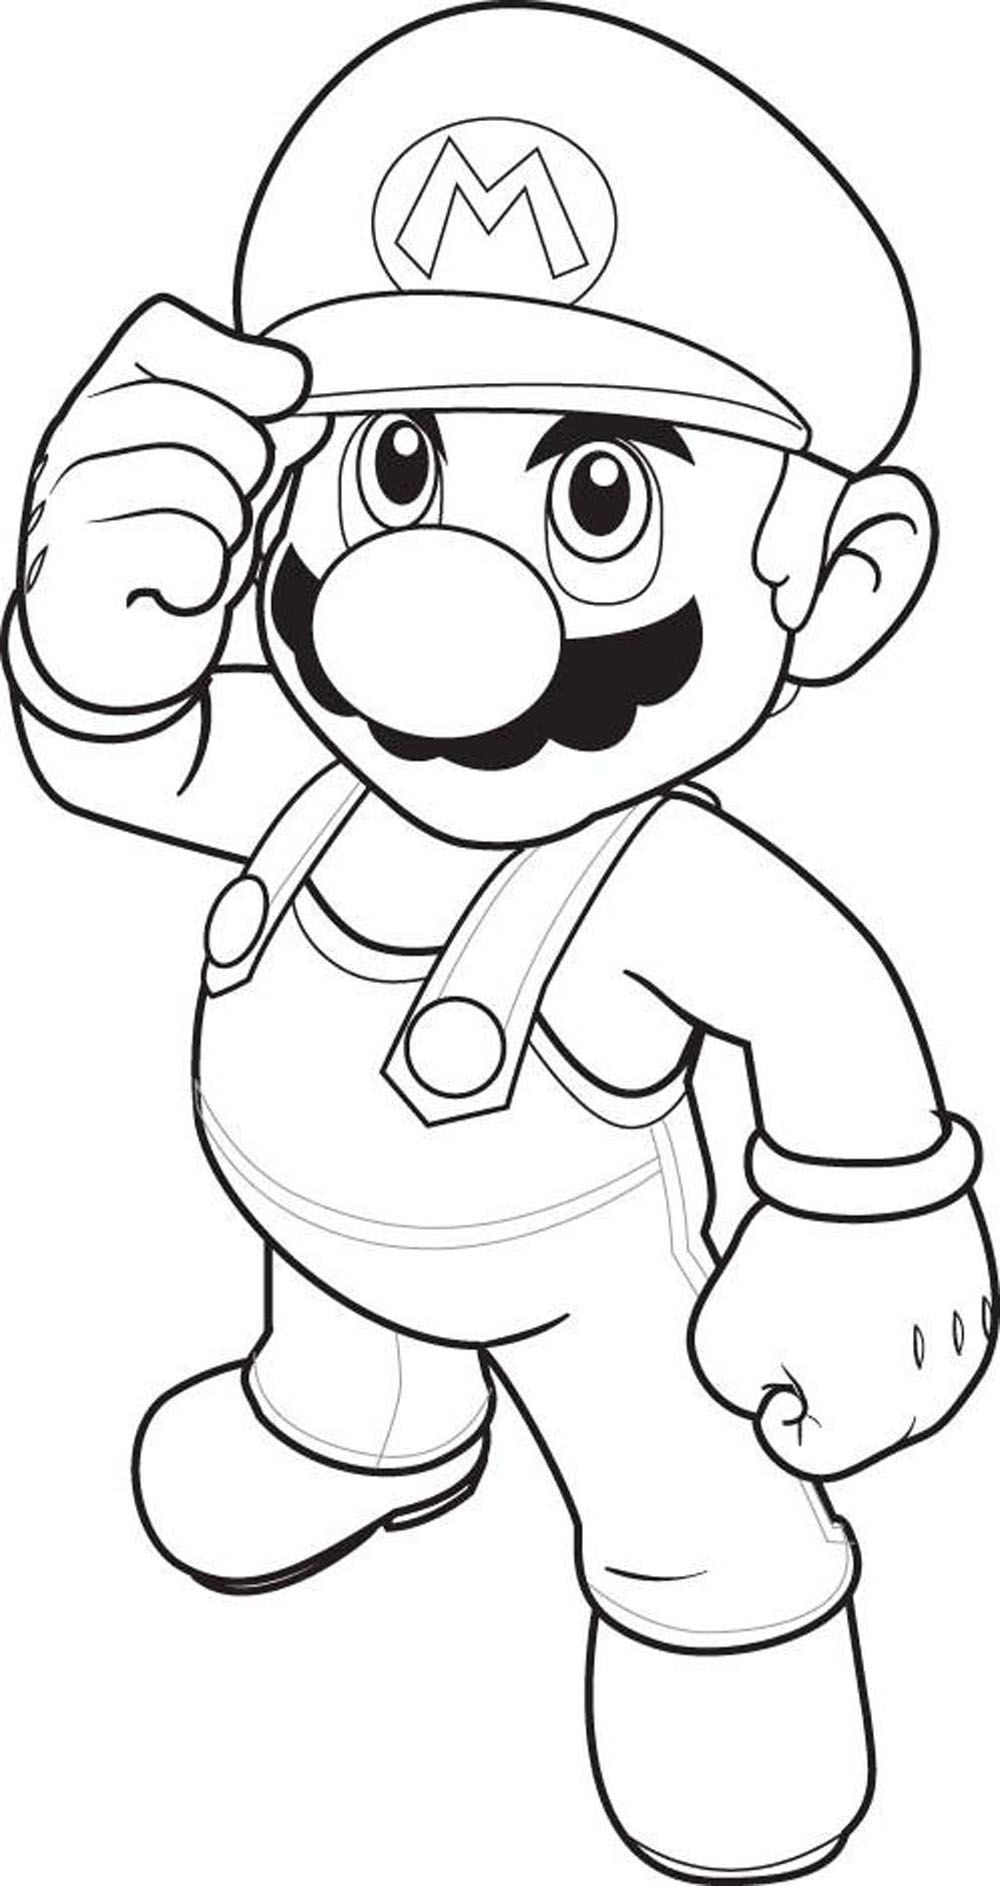 Mario Coloring Pages For Kids
 All Mario Characters Coloring Pages Coloring Home